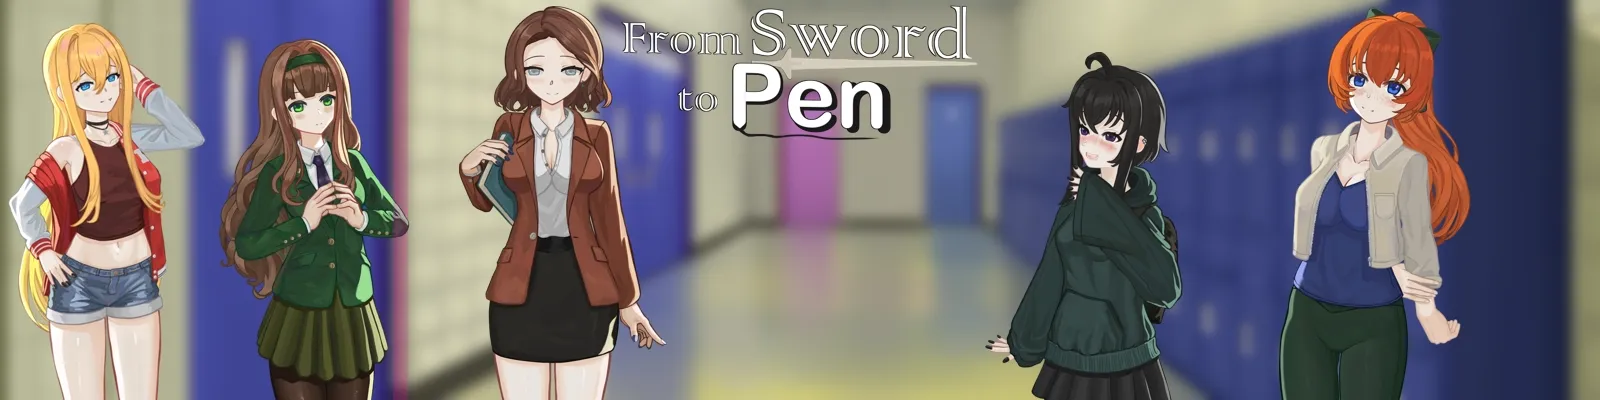 From Sword to Pen [v0.2]